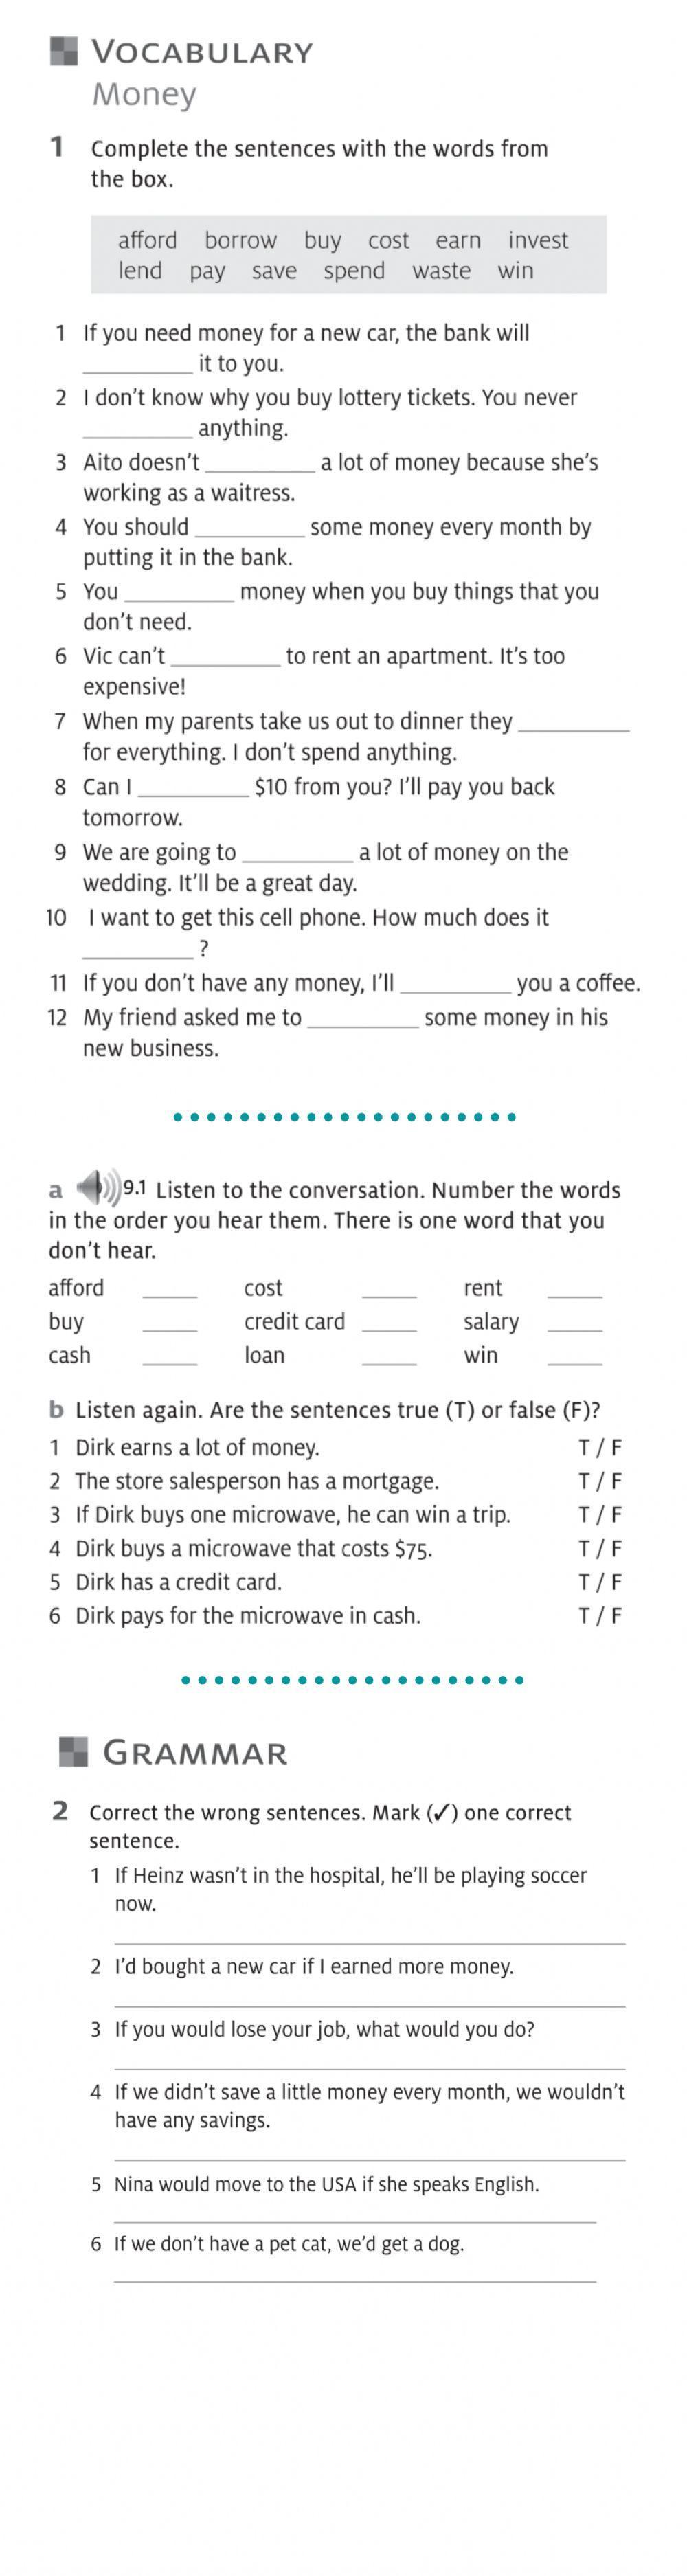 Money Vocabulary and Passive voice in Simple past.